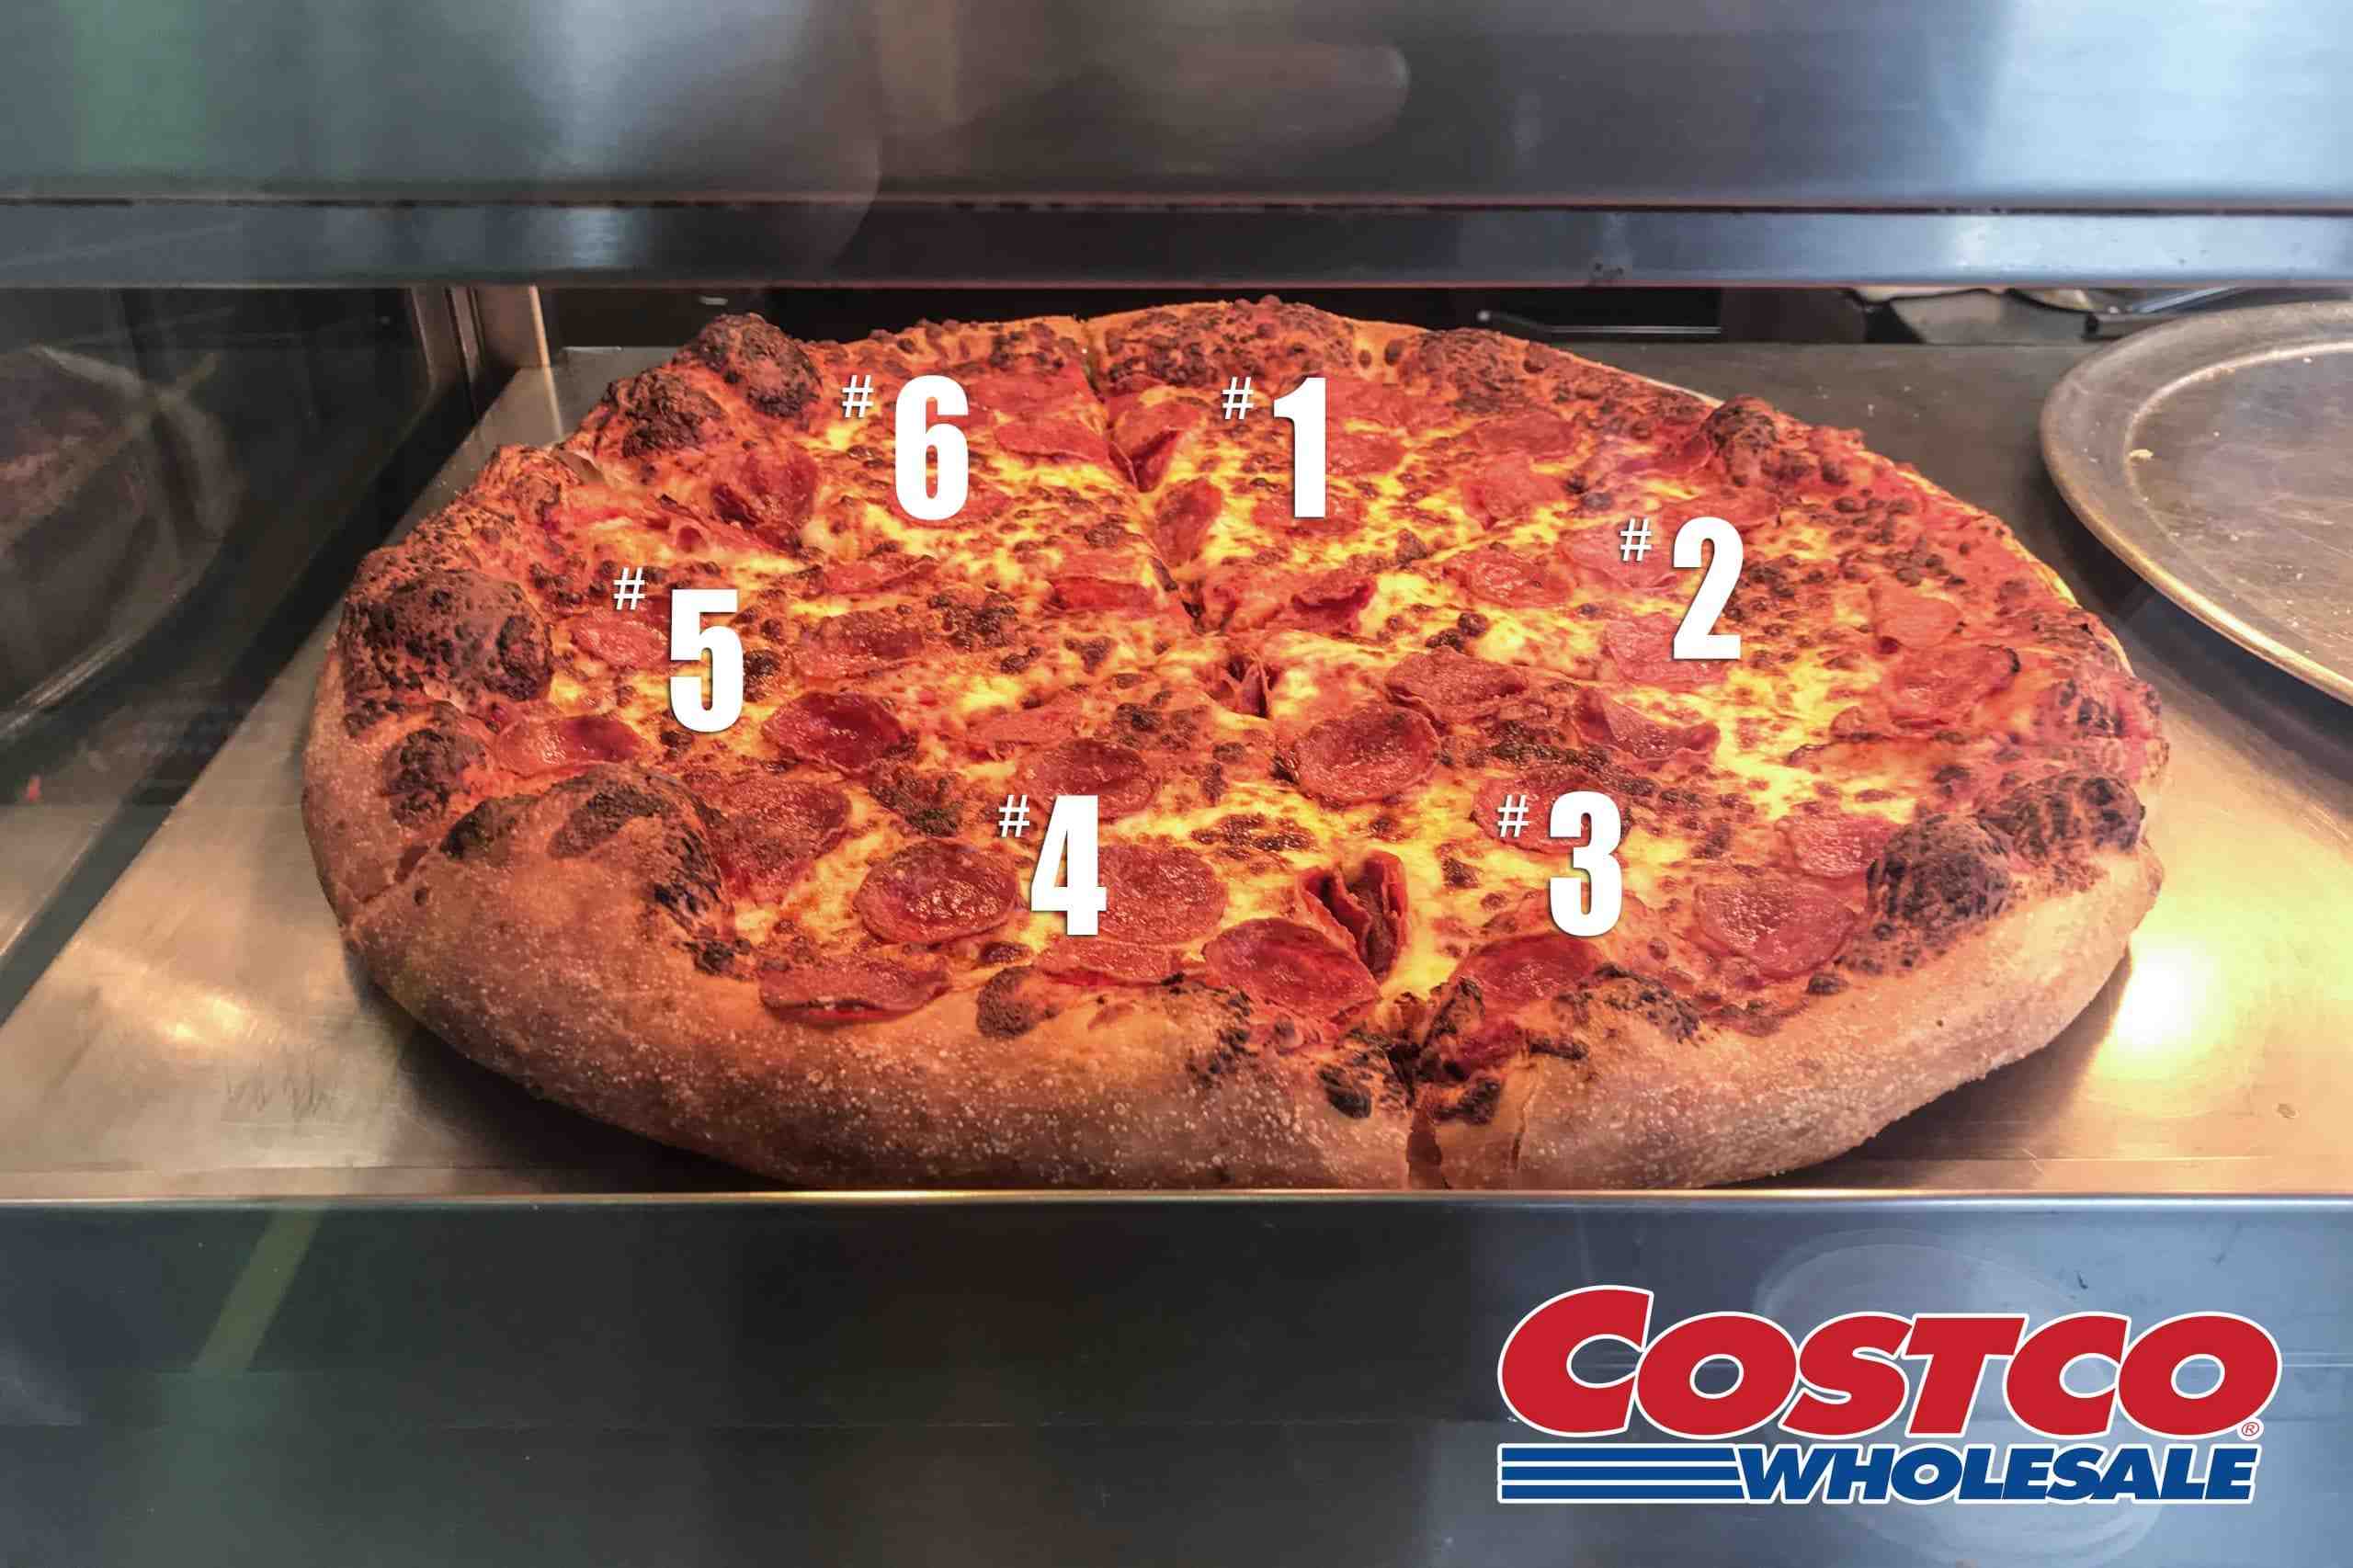 What is on a Costco supreme pizza?